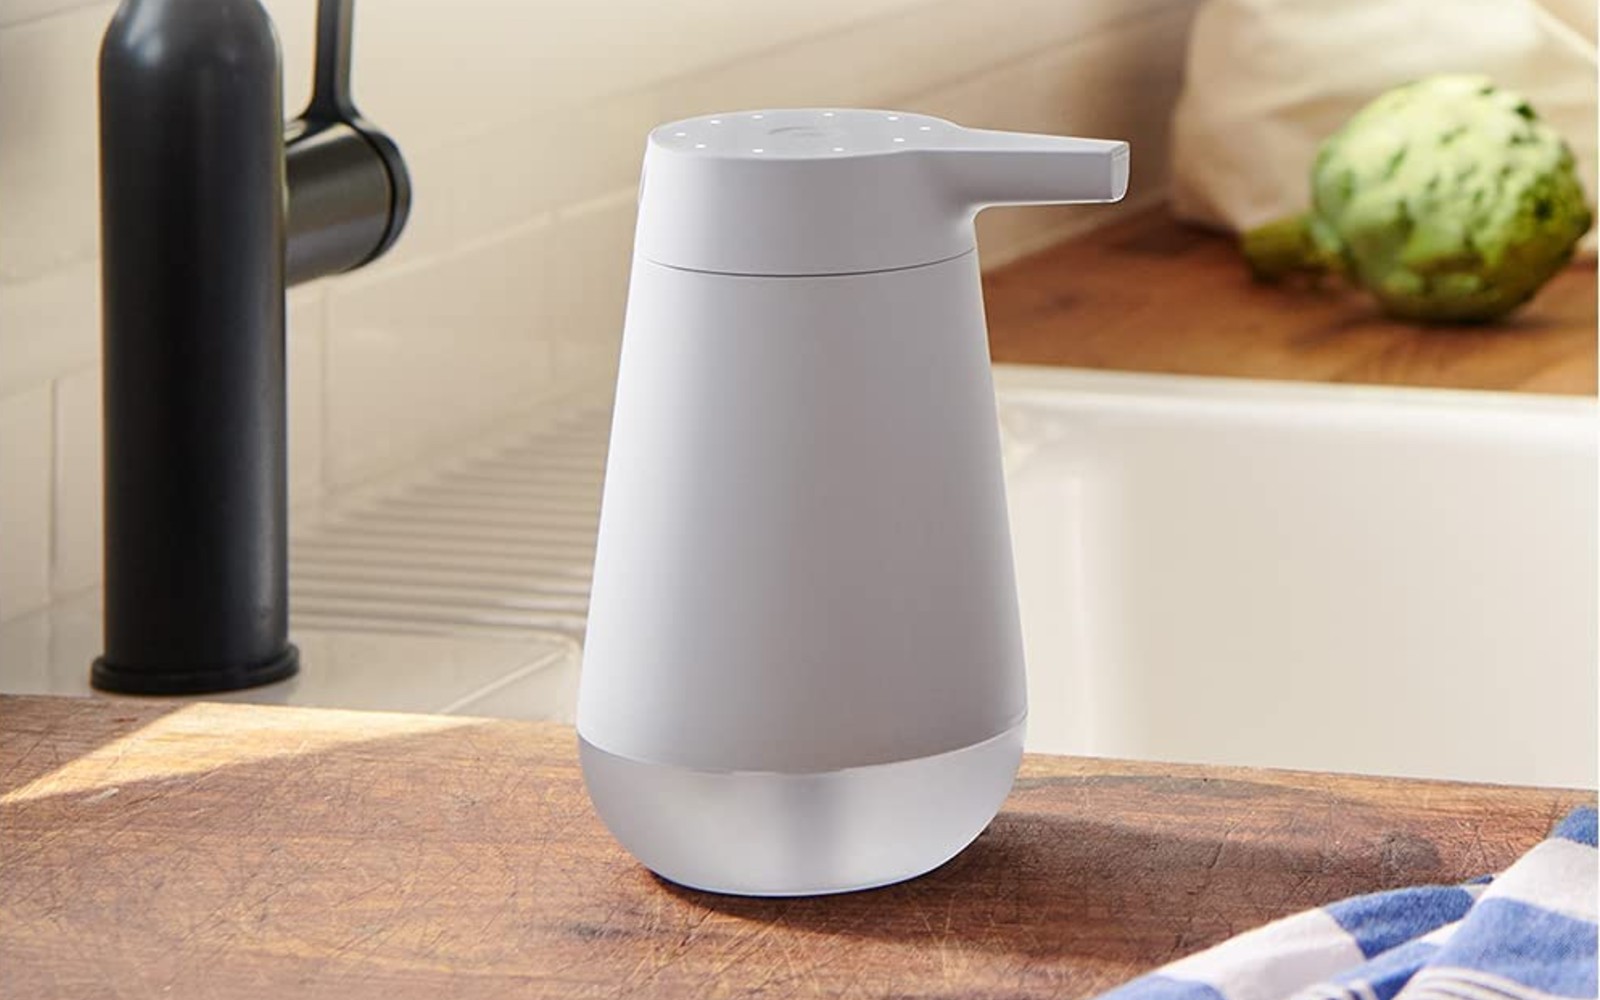 Amazon made a $55 soap dispenser that reminds you to elegant for 20 seconds